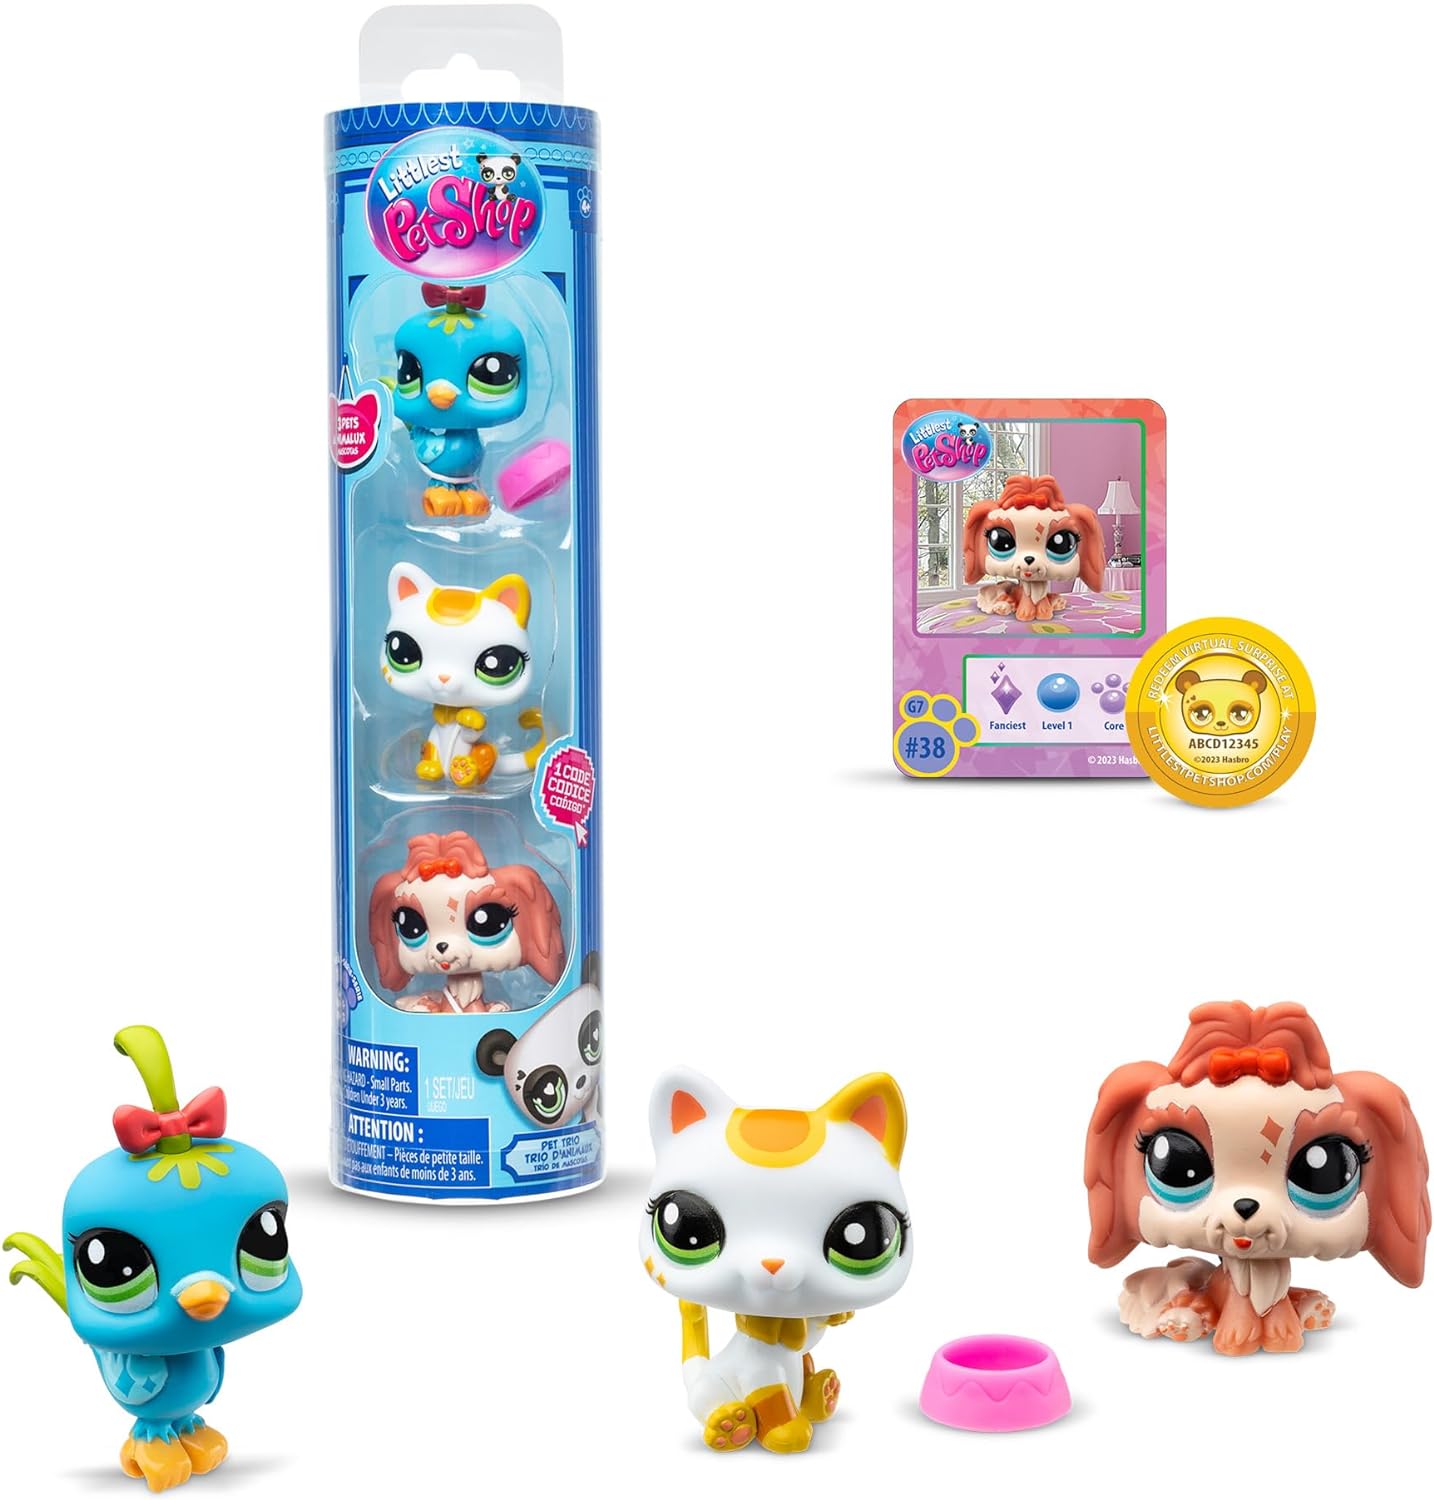 Hasbro and Basic Fun! Ink Global Master Toy License to Relaunch Littlest  Pet Shop - aNb Media, Inc.